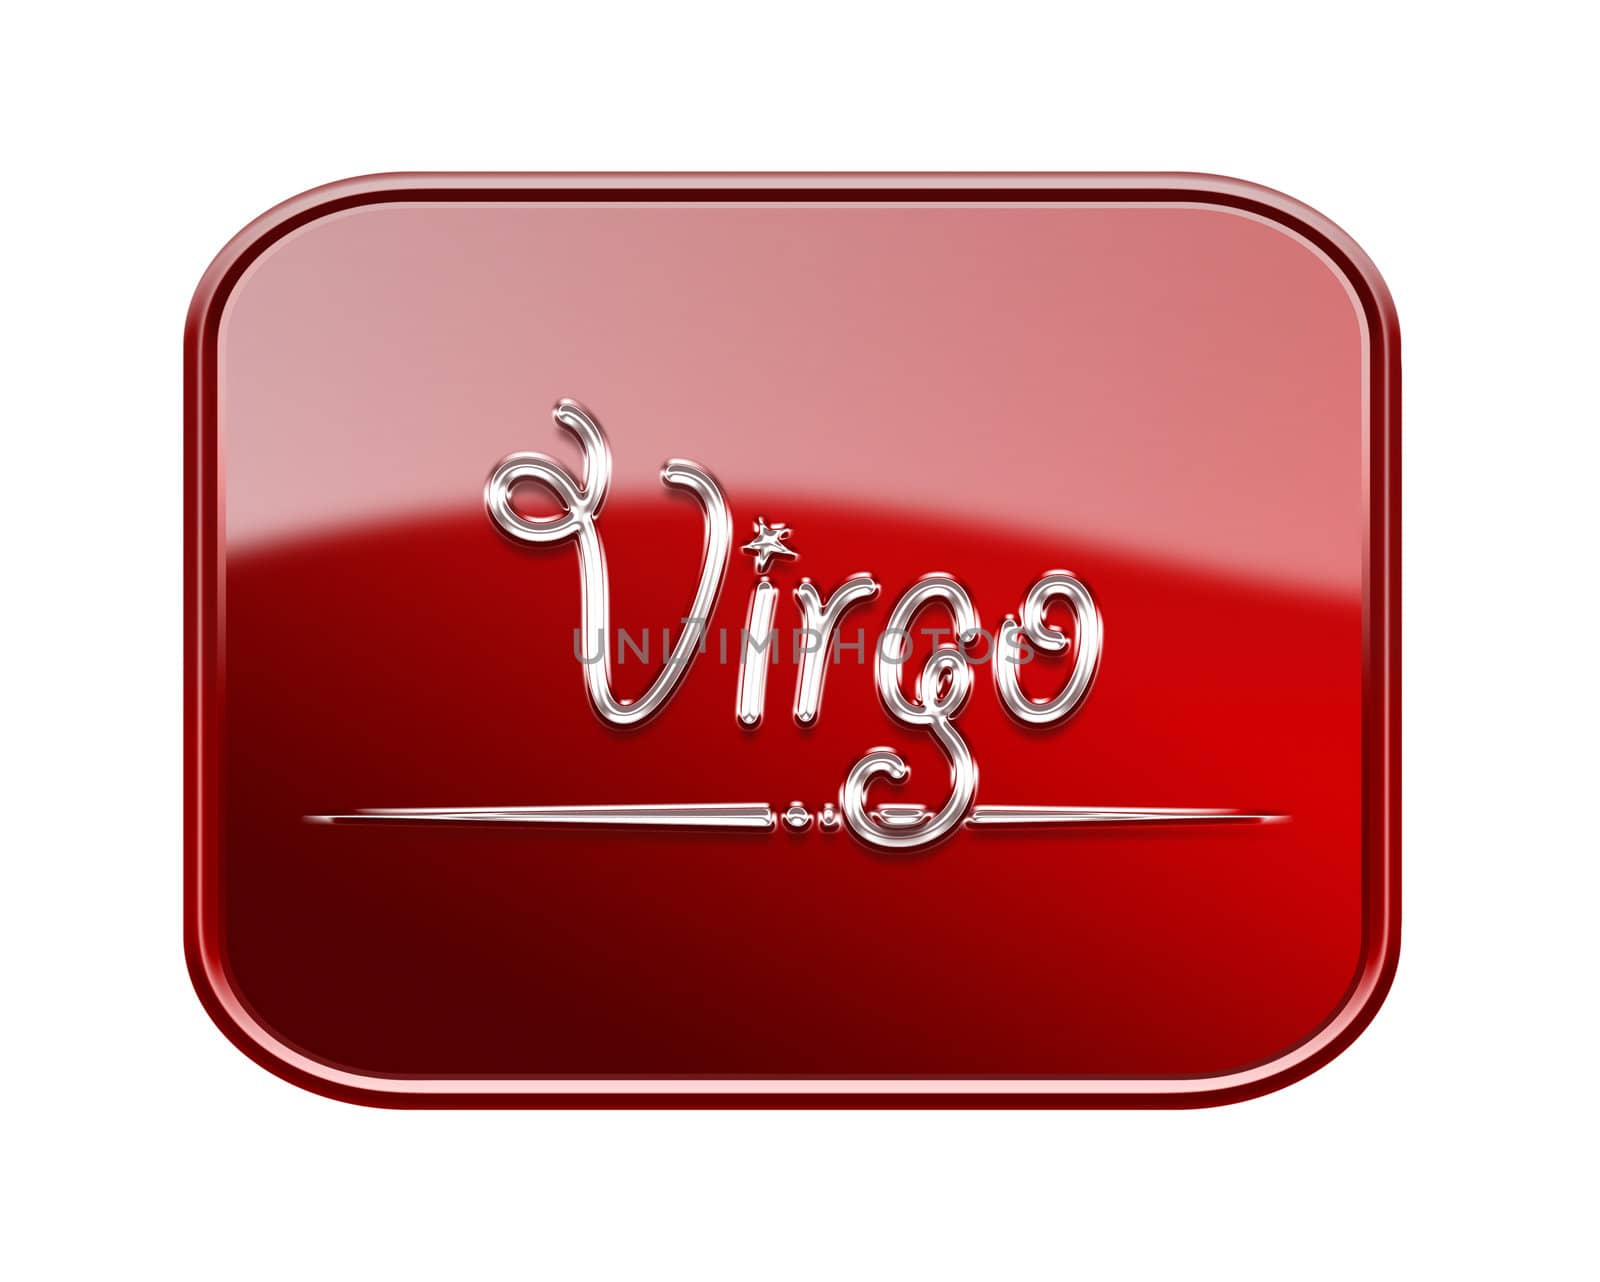 Virgo zodiac icon red glossy, isolated on white background by zeffss